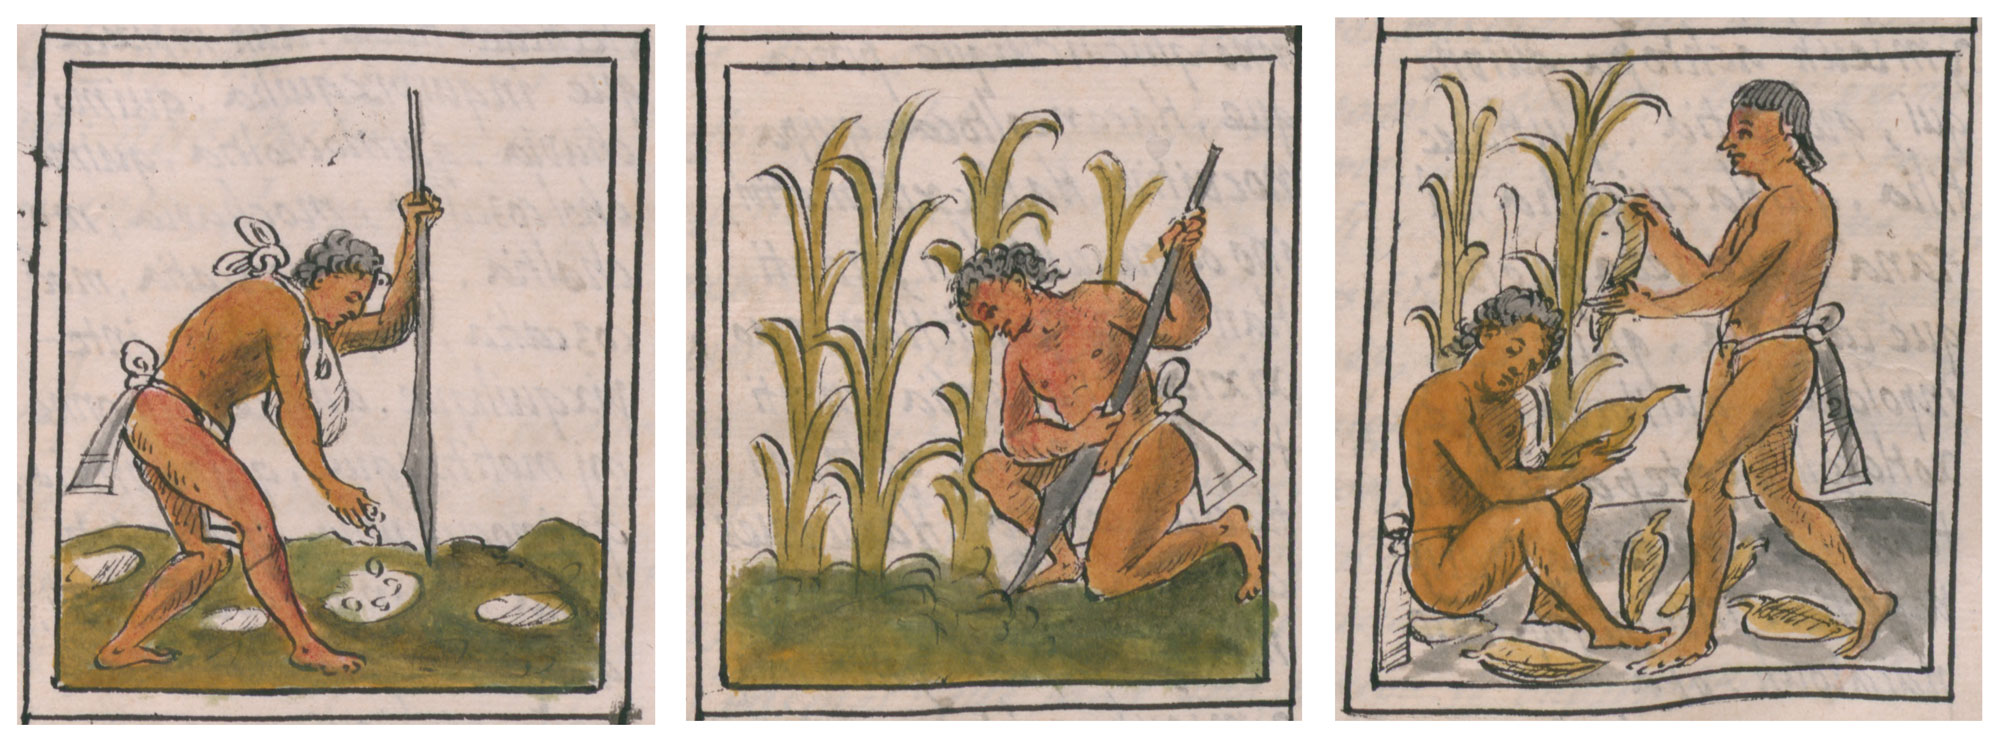 3-Panel image showing illustrations of men planting and tending to maize plants from the Florentine Codex, a book which dates to the 1500s. The first panel shows a man digging holes and planting kernels that he is carrying in a sack around his neck. The second panel shows a man tending to maize plants. The man is kneeling and digging the end of an elongated tool into the ground. The third panel shows two men harvesting ears of maize.